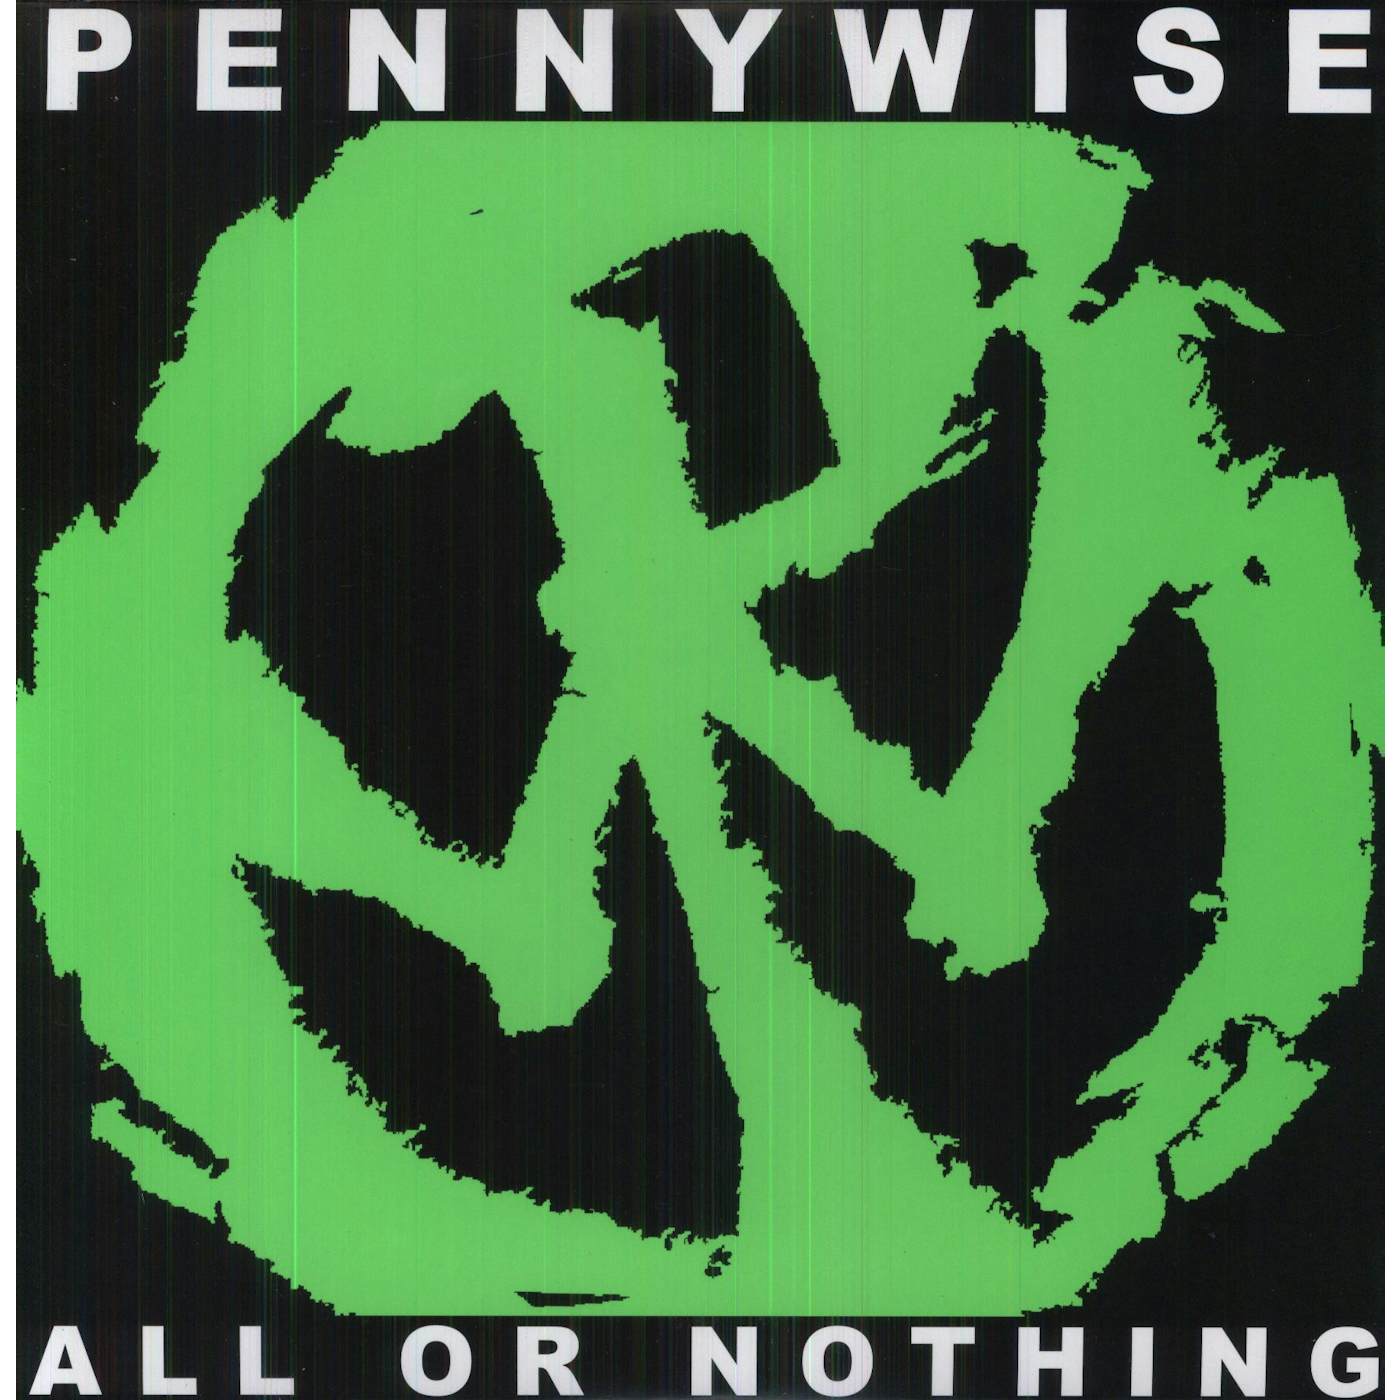 Pennywise All Or Nothing Vinyl Record